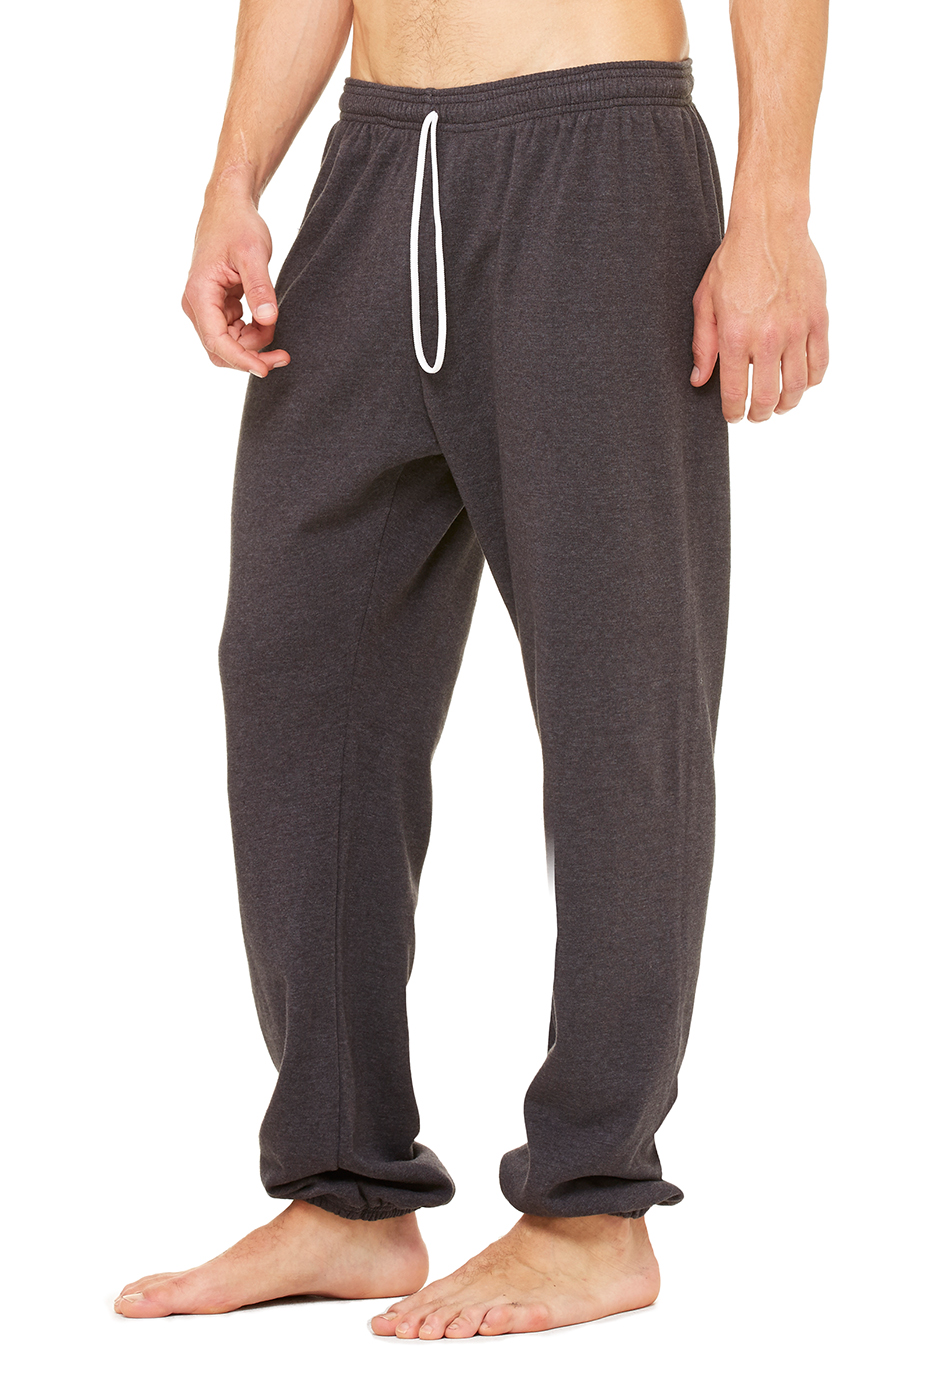 WMNS Two Tone Scrunch Athletic Pants - Gray